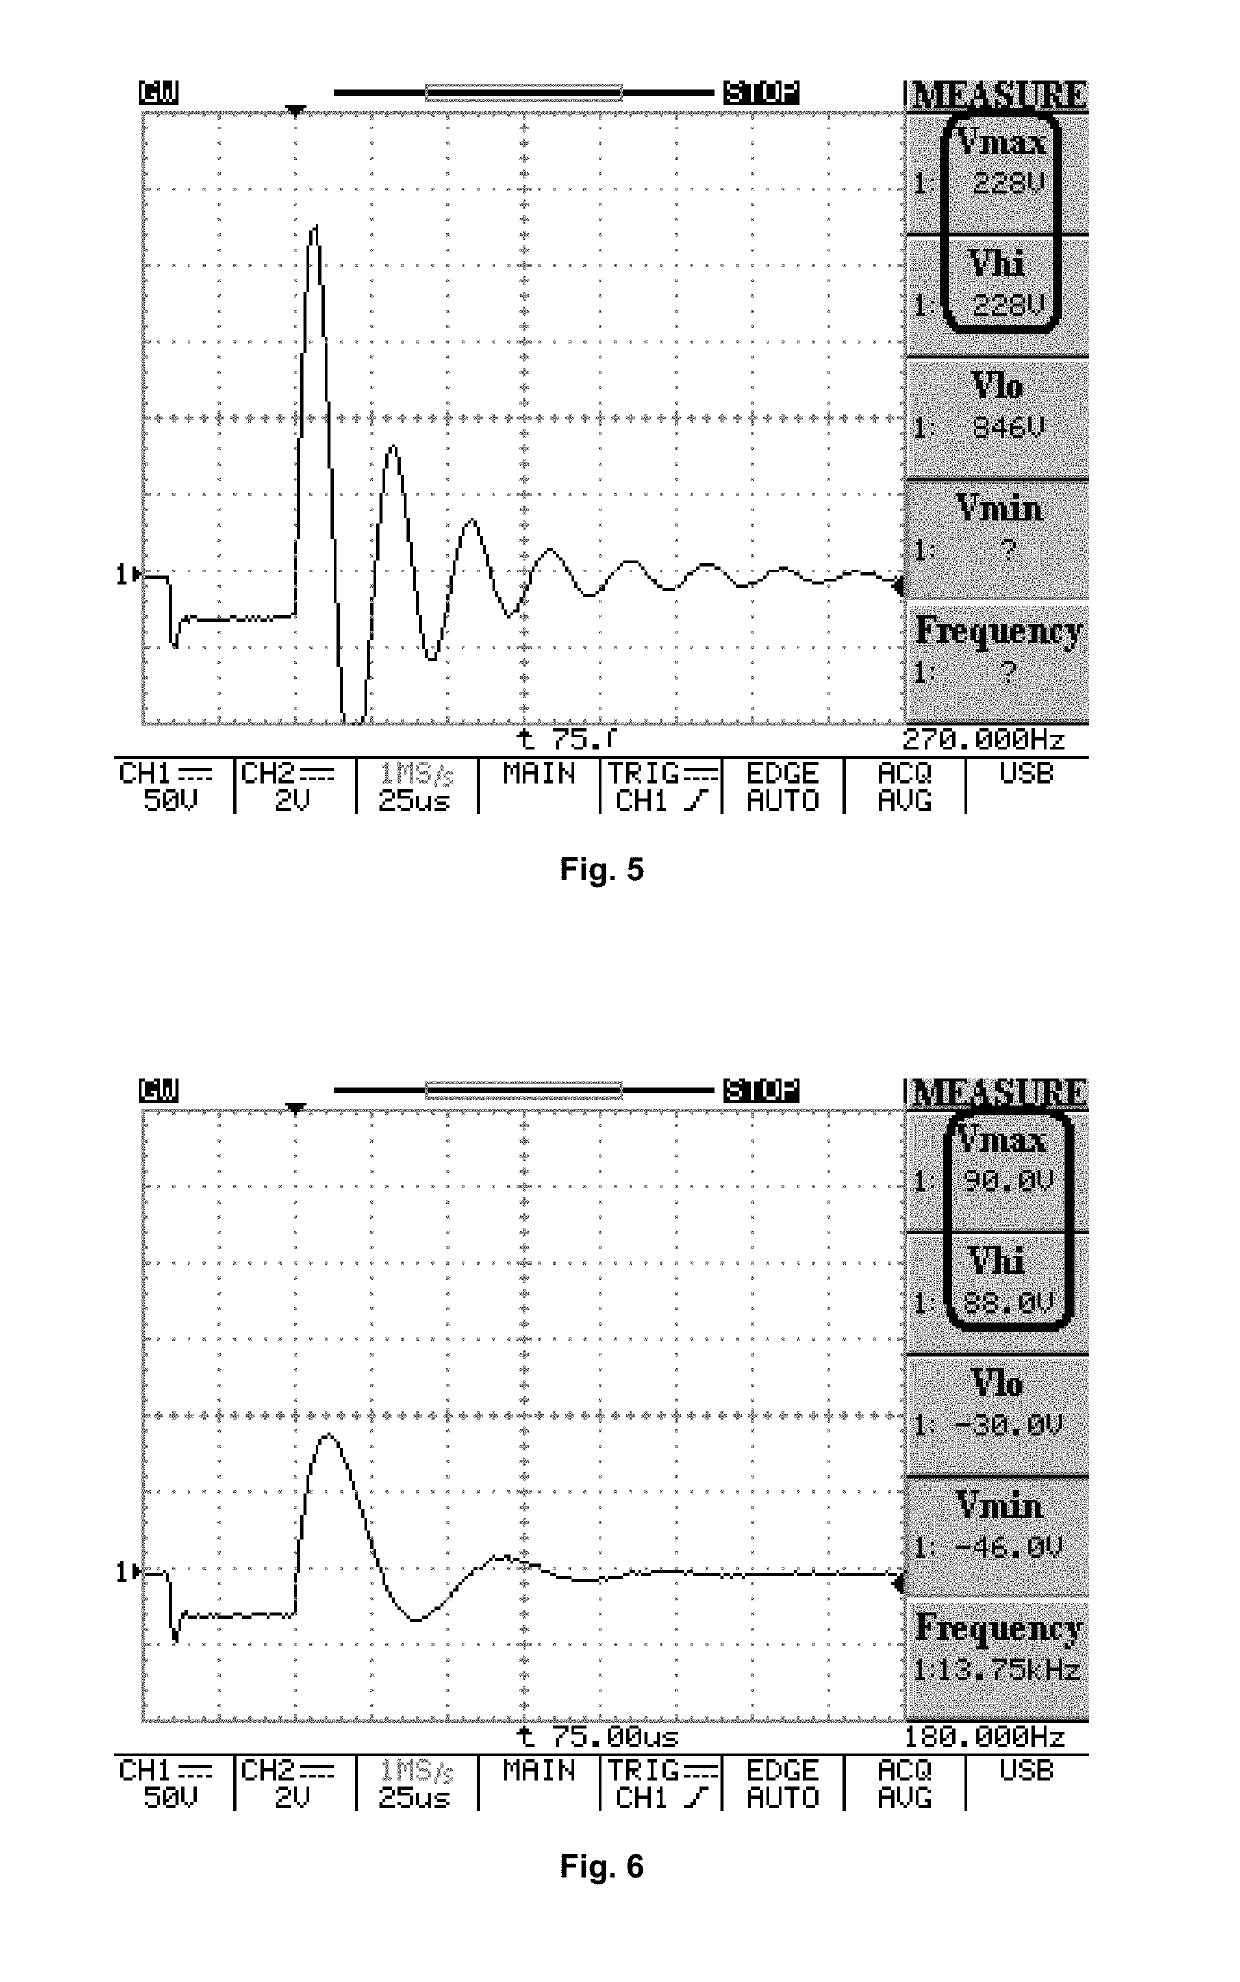 Method for identifying optimal regions for cardioversion therapy (variants)